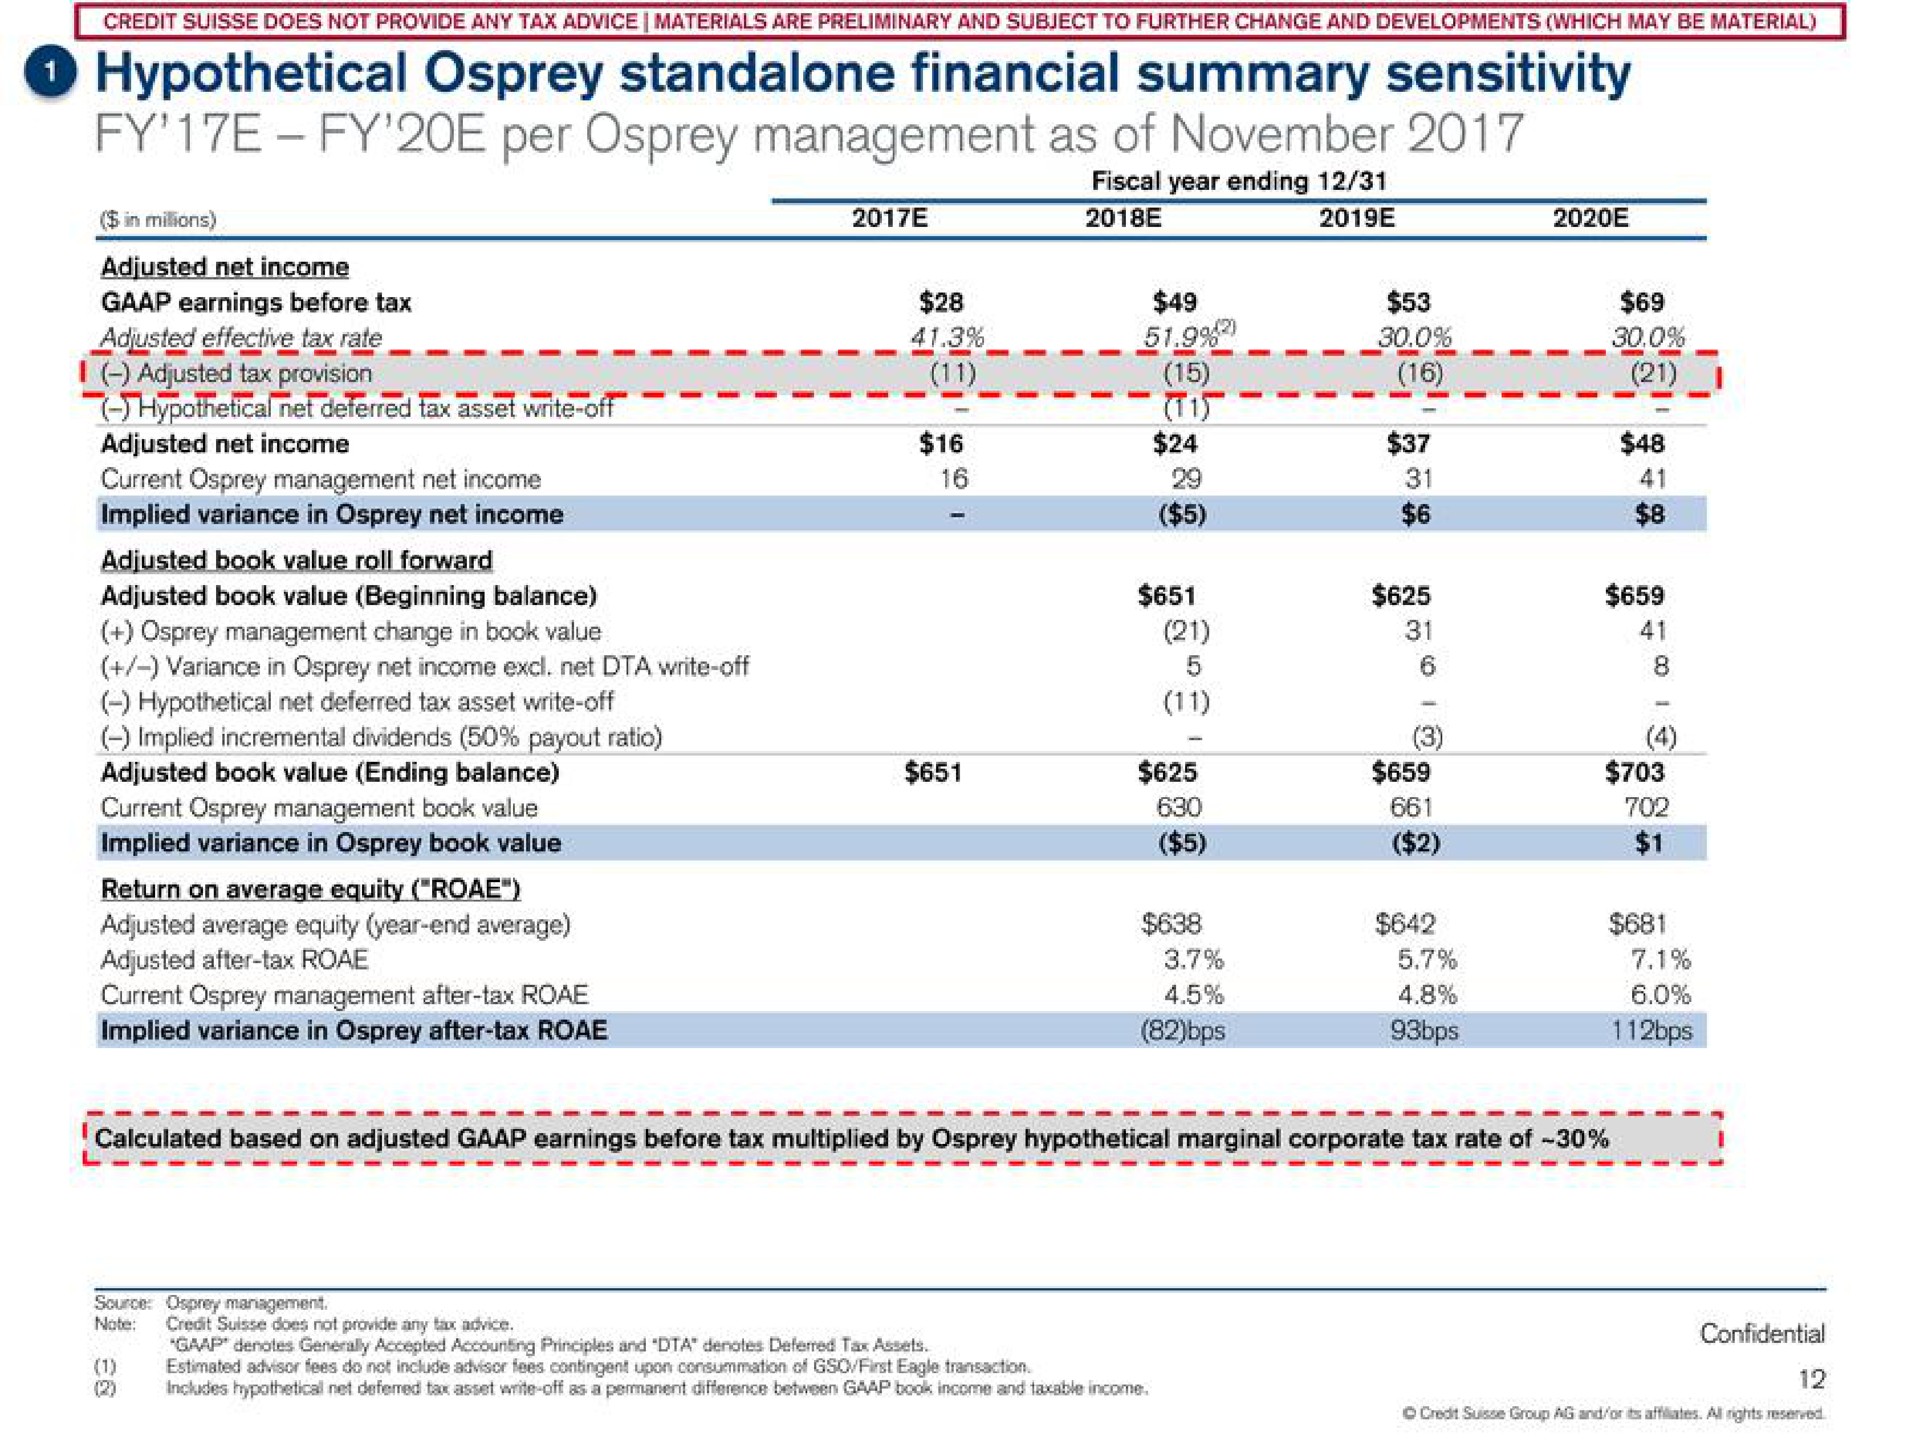 hypothetical osprey financial summary per osprey management as of effective | Credit Suisse